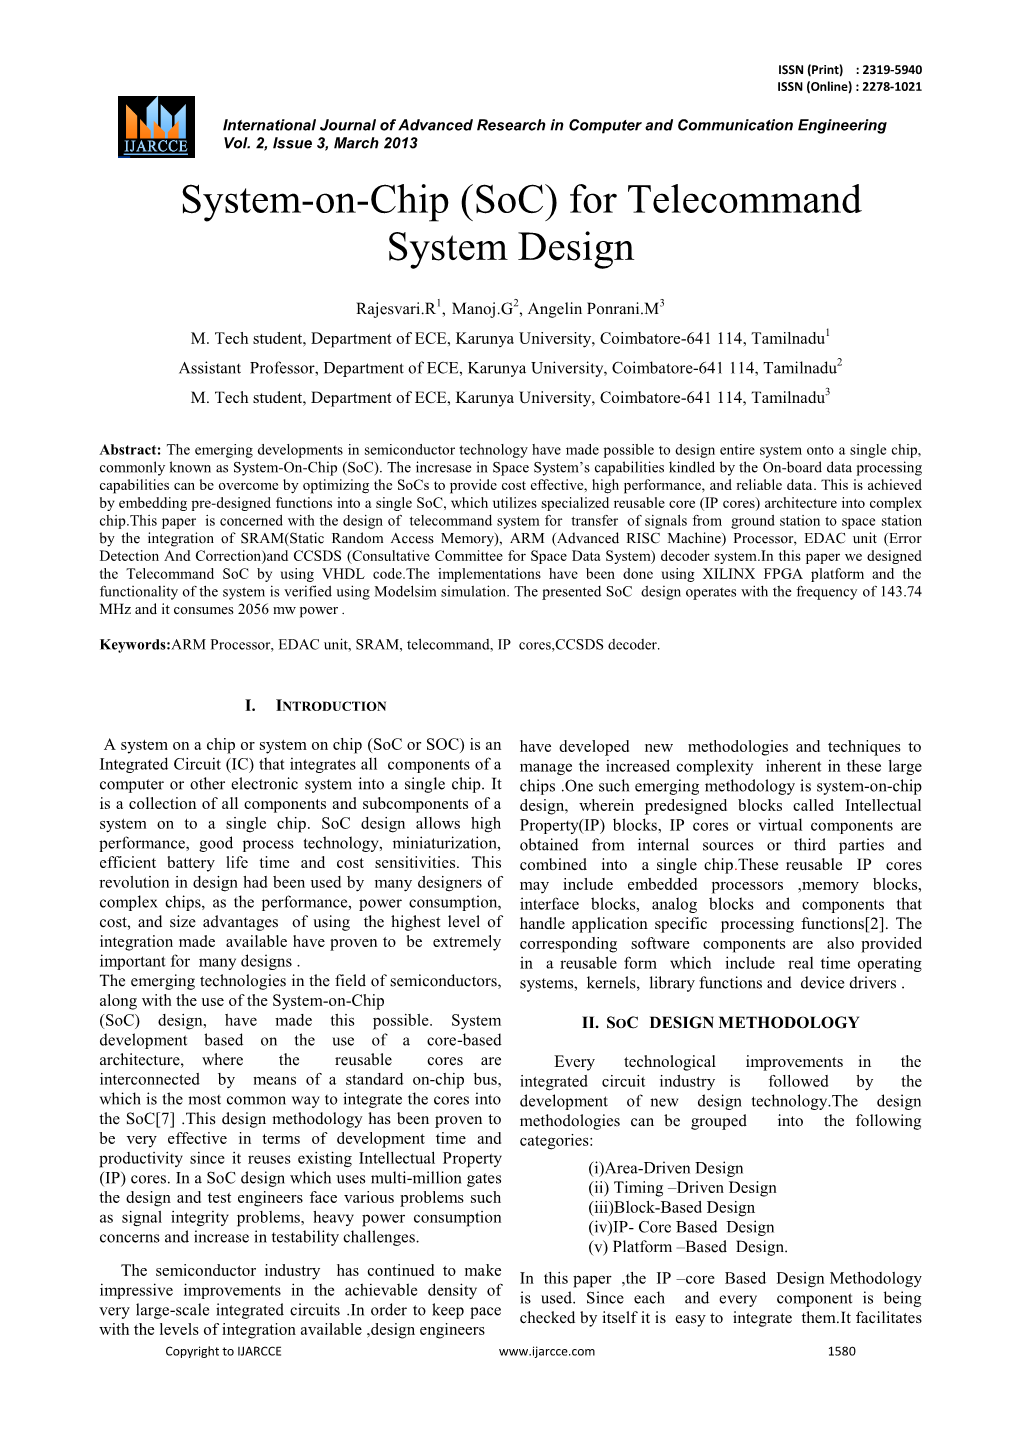 System-On-Chip (Soc) for Telecommand System Design